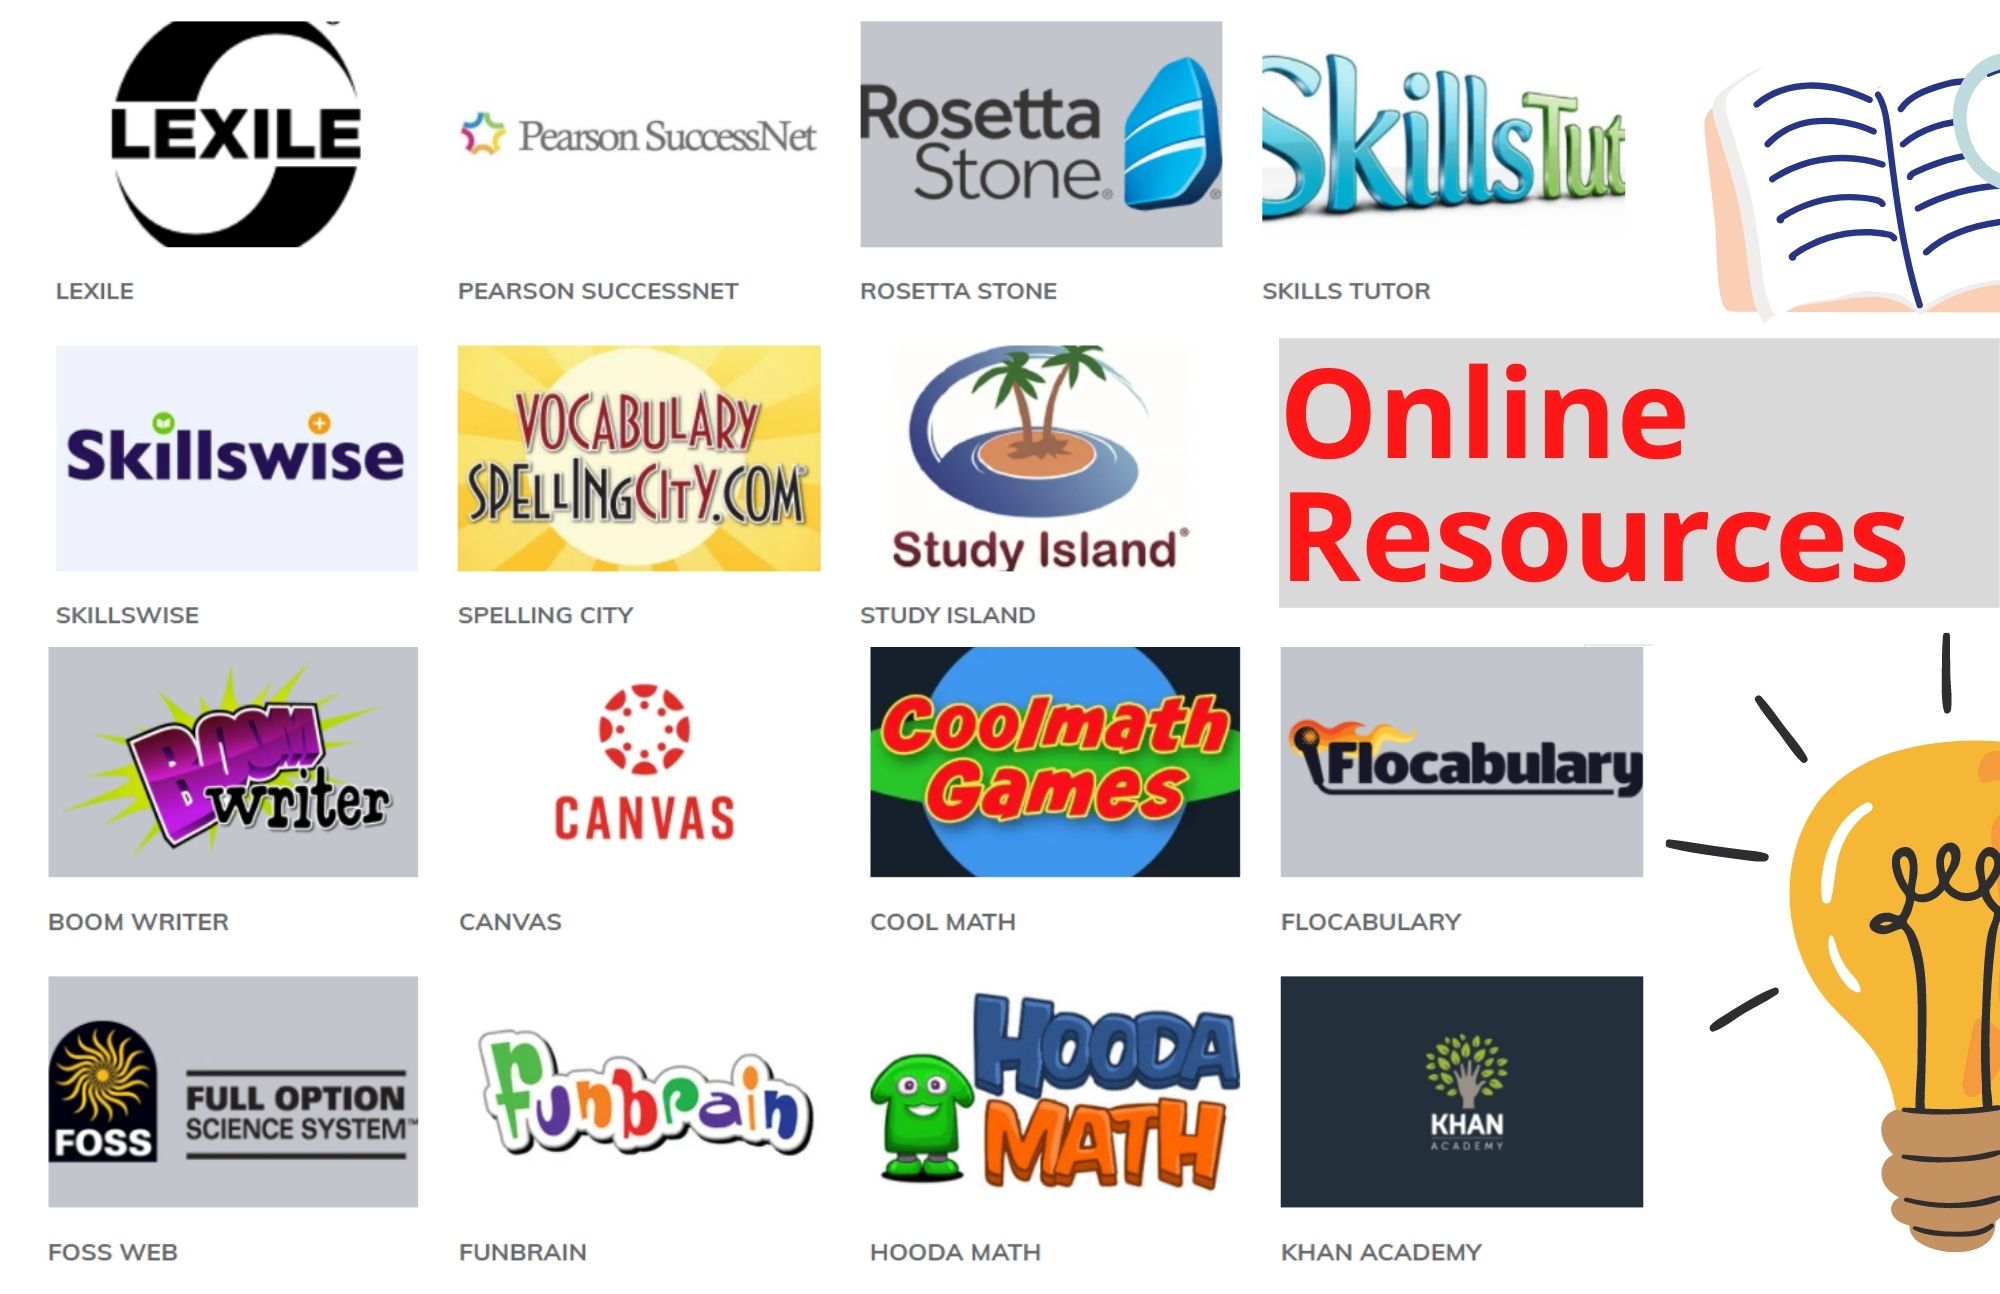 Compilation of Online resources and also their specific icons with a light bulb and book graphics on the right corner